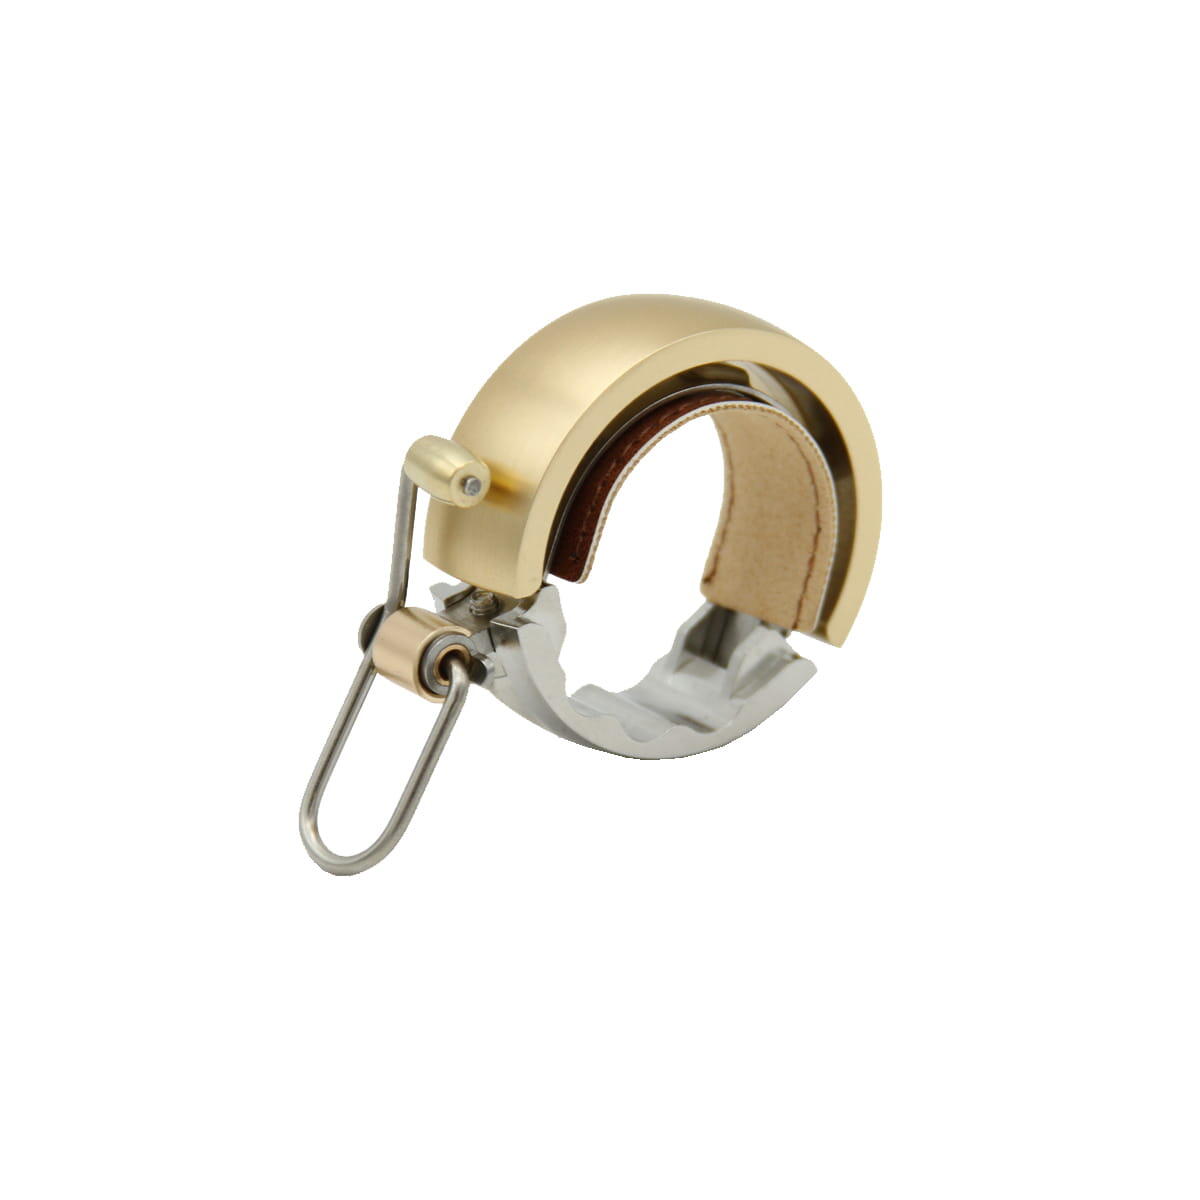 KNOG Knog Oi Luxe Bicycle Bell Large Brass